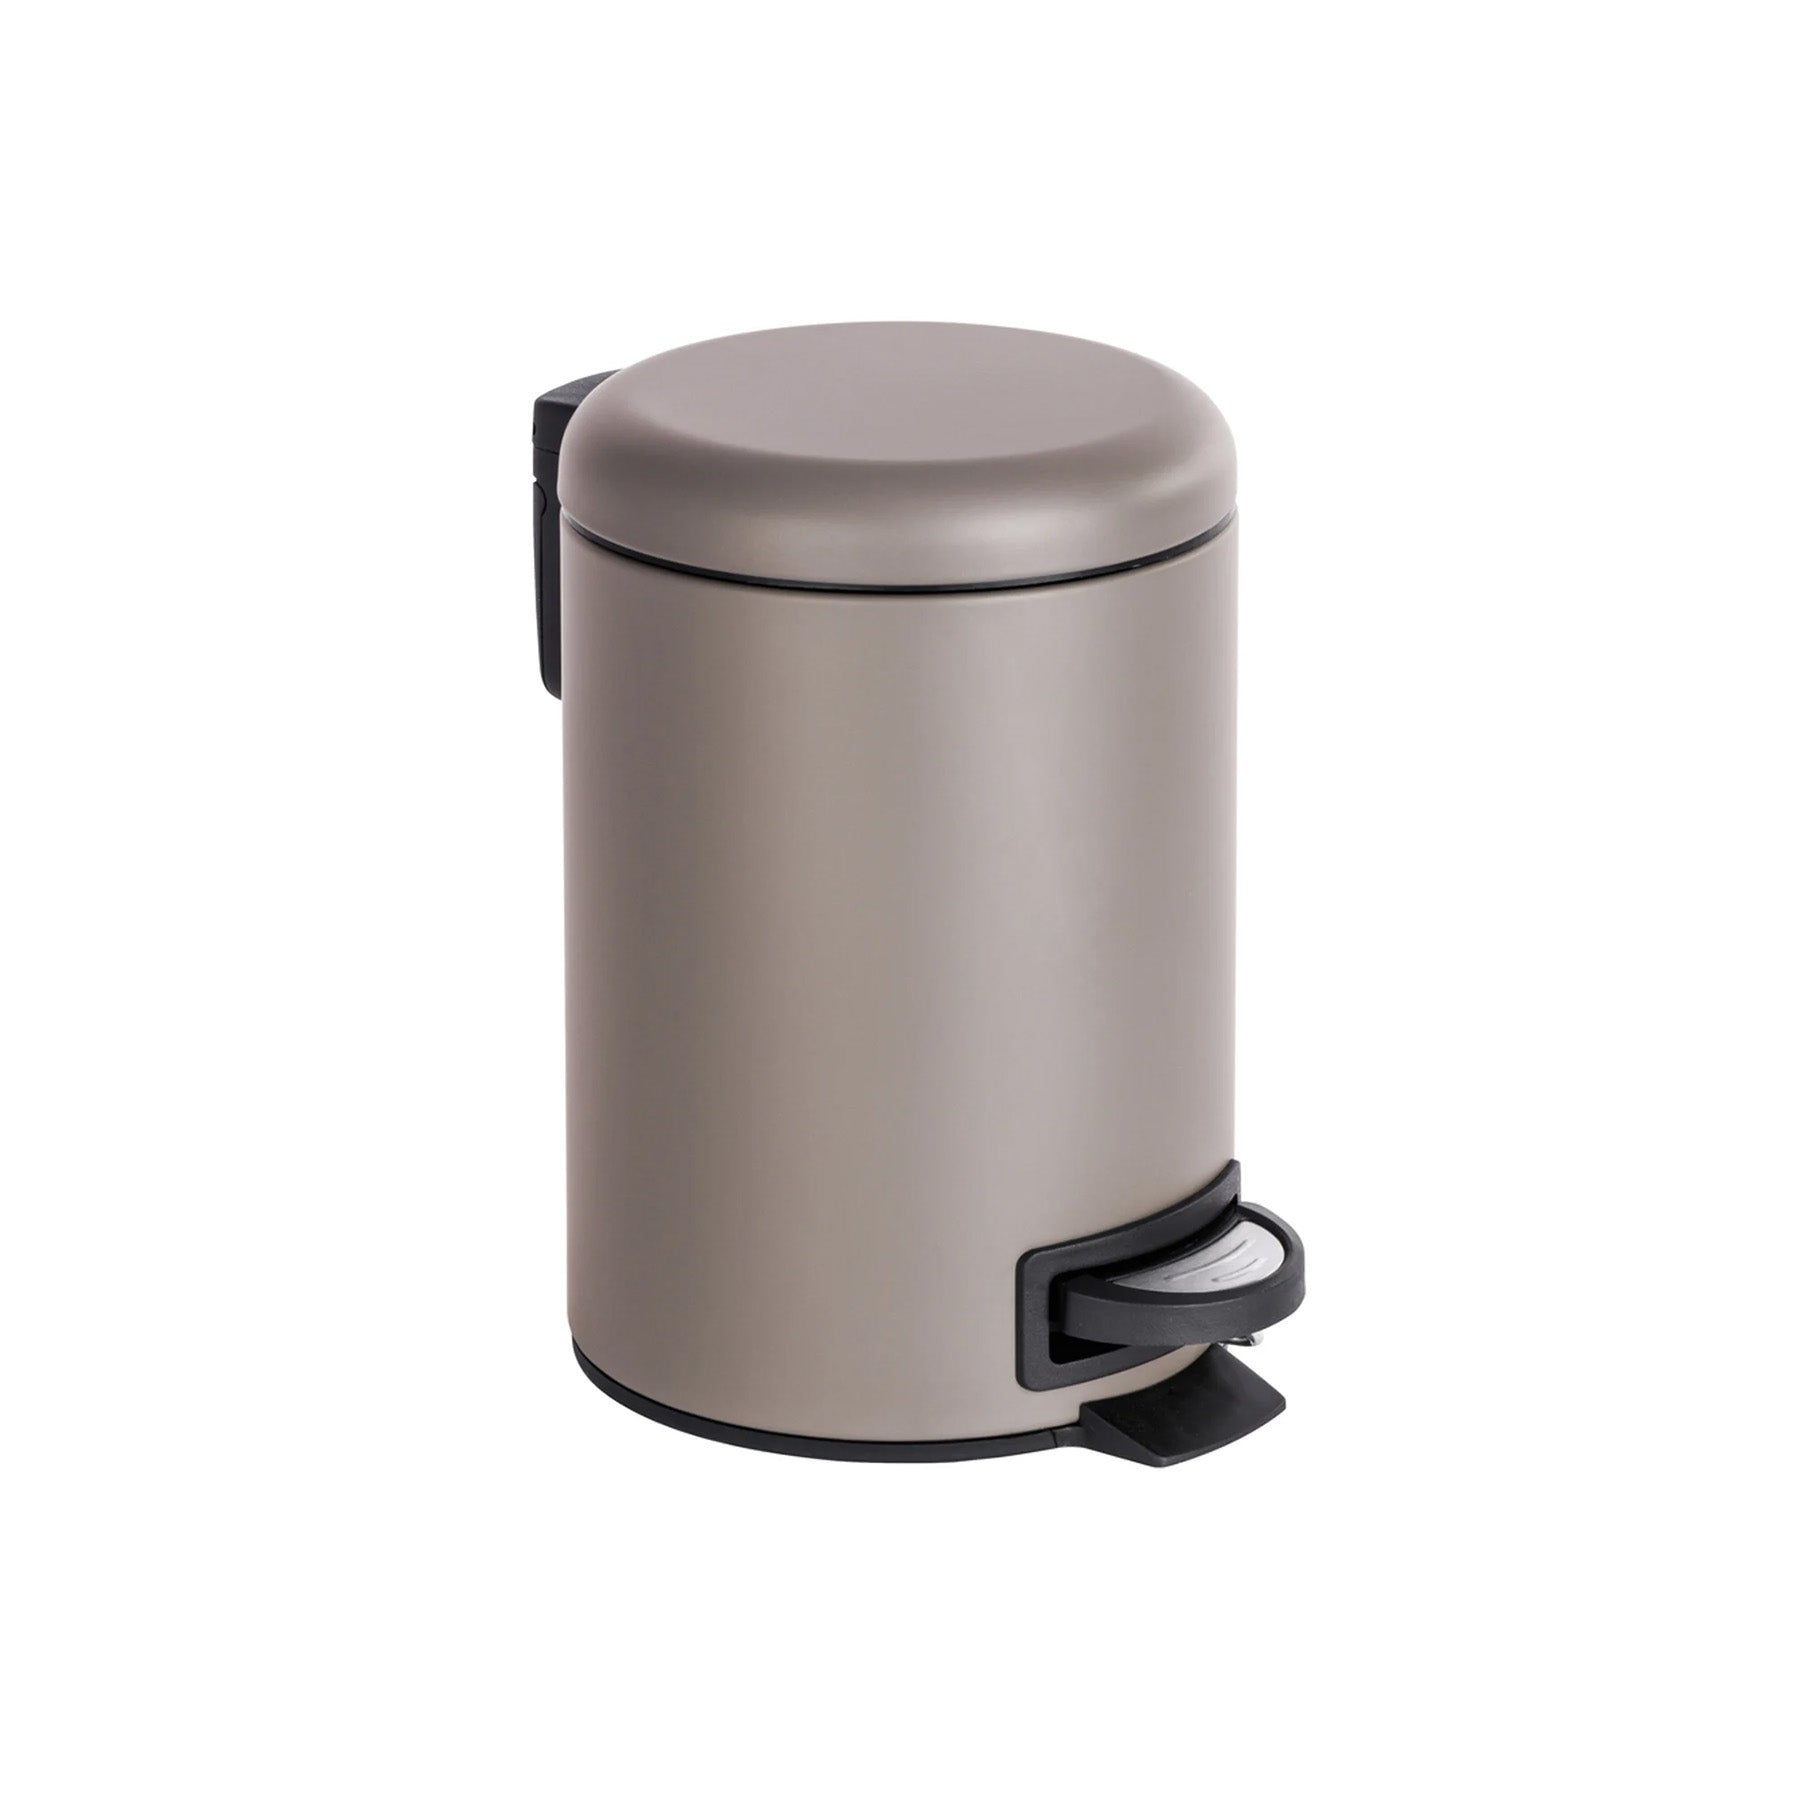 Matt taupe steel pedal bin with removable in basket.